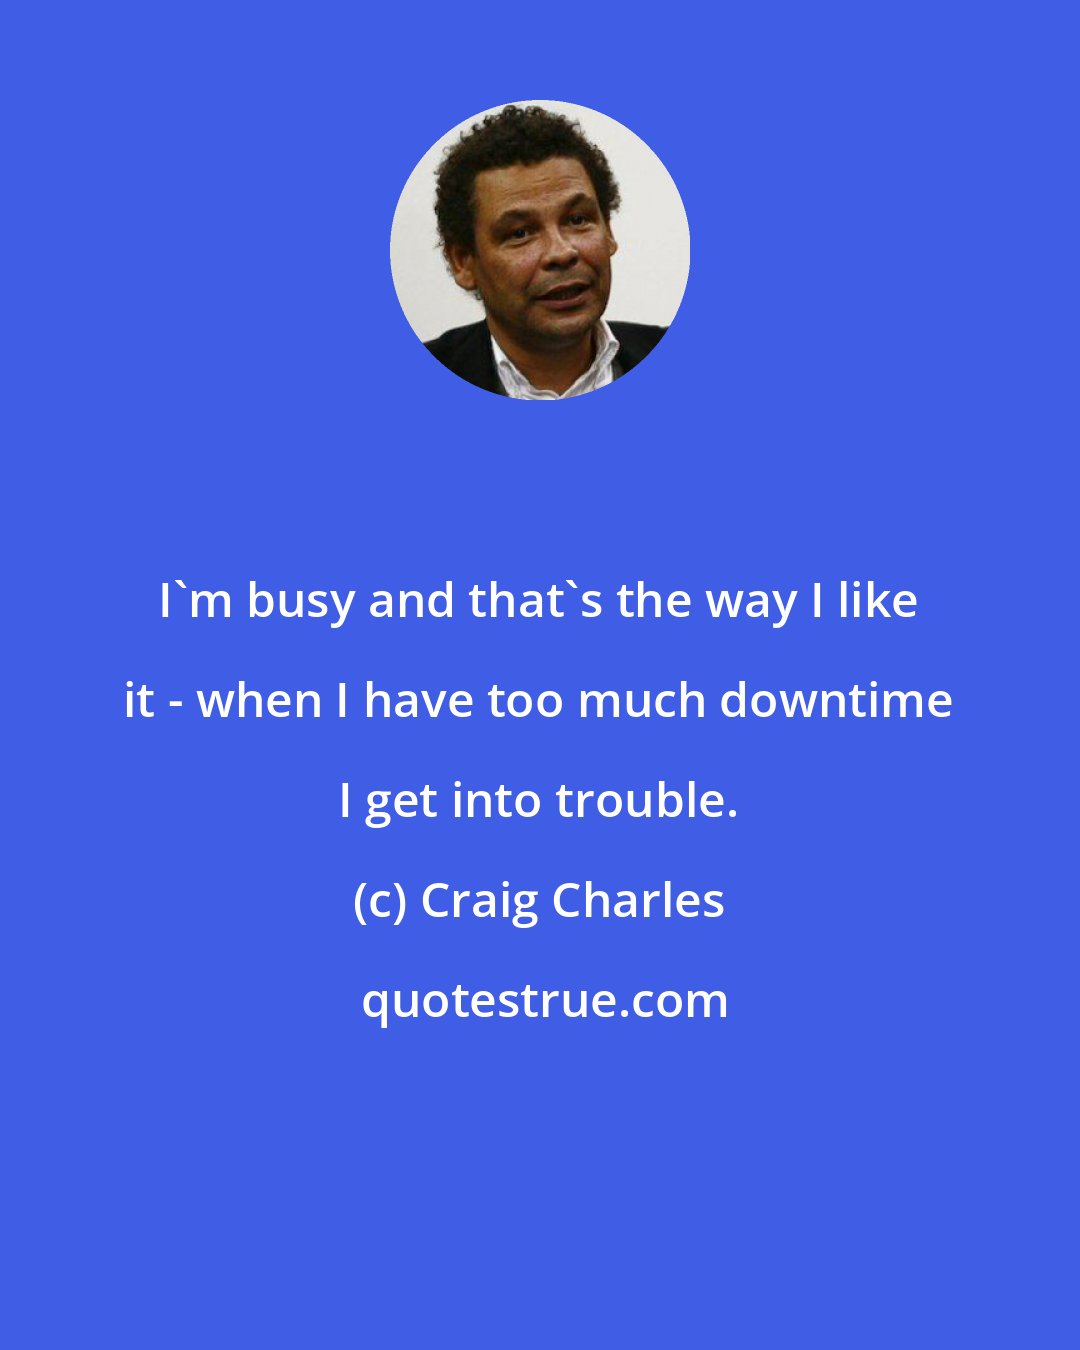 Craig Charles: I'm busy and that's the way I like it - when I have too much downtime I get into trouble.